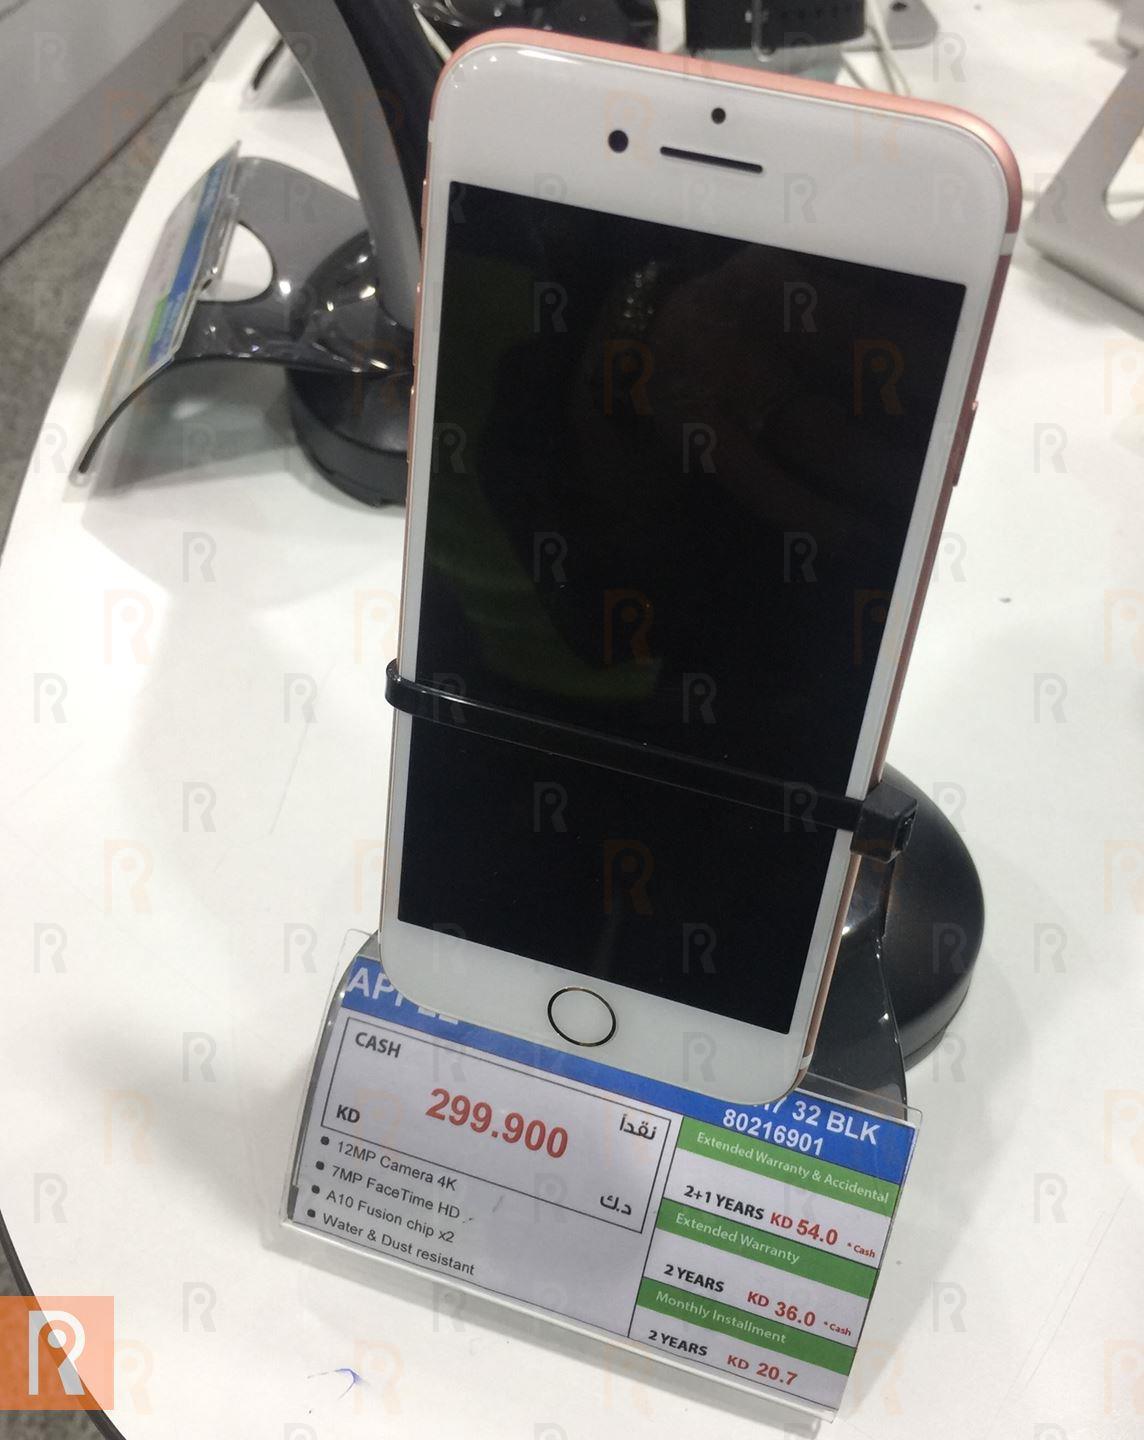 Prices of iPhone 7 in Kuwait